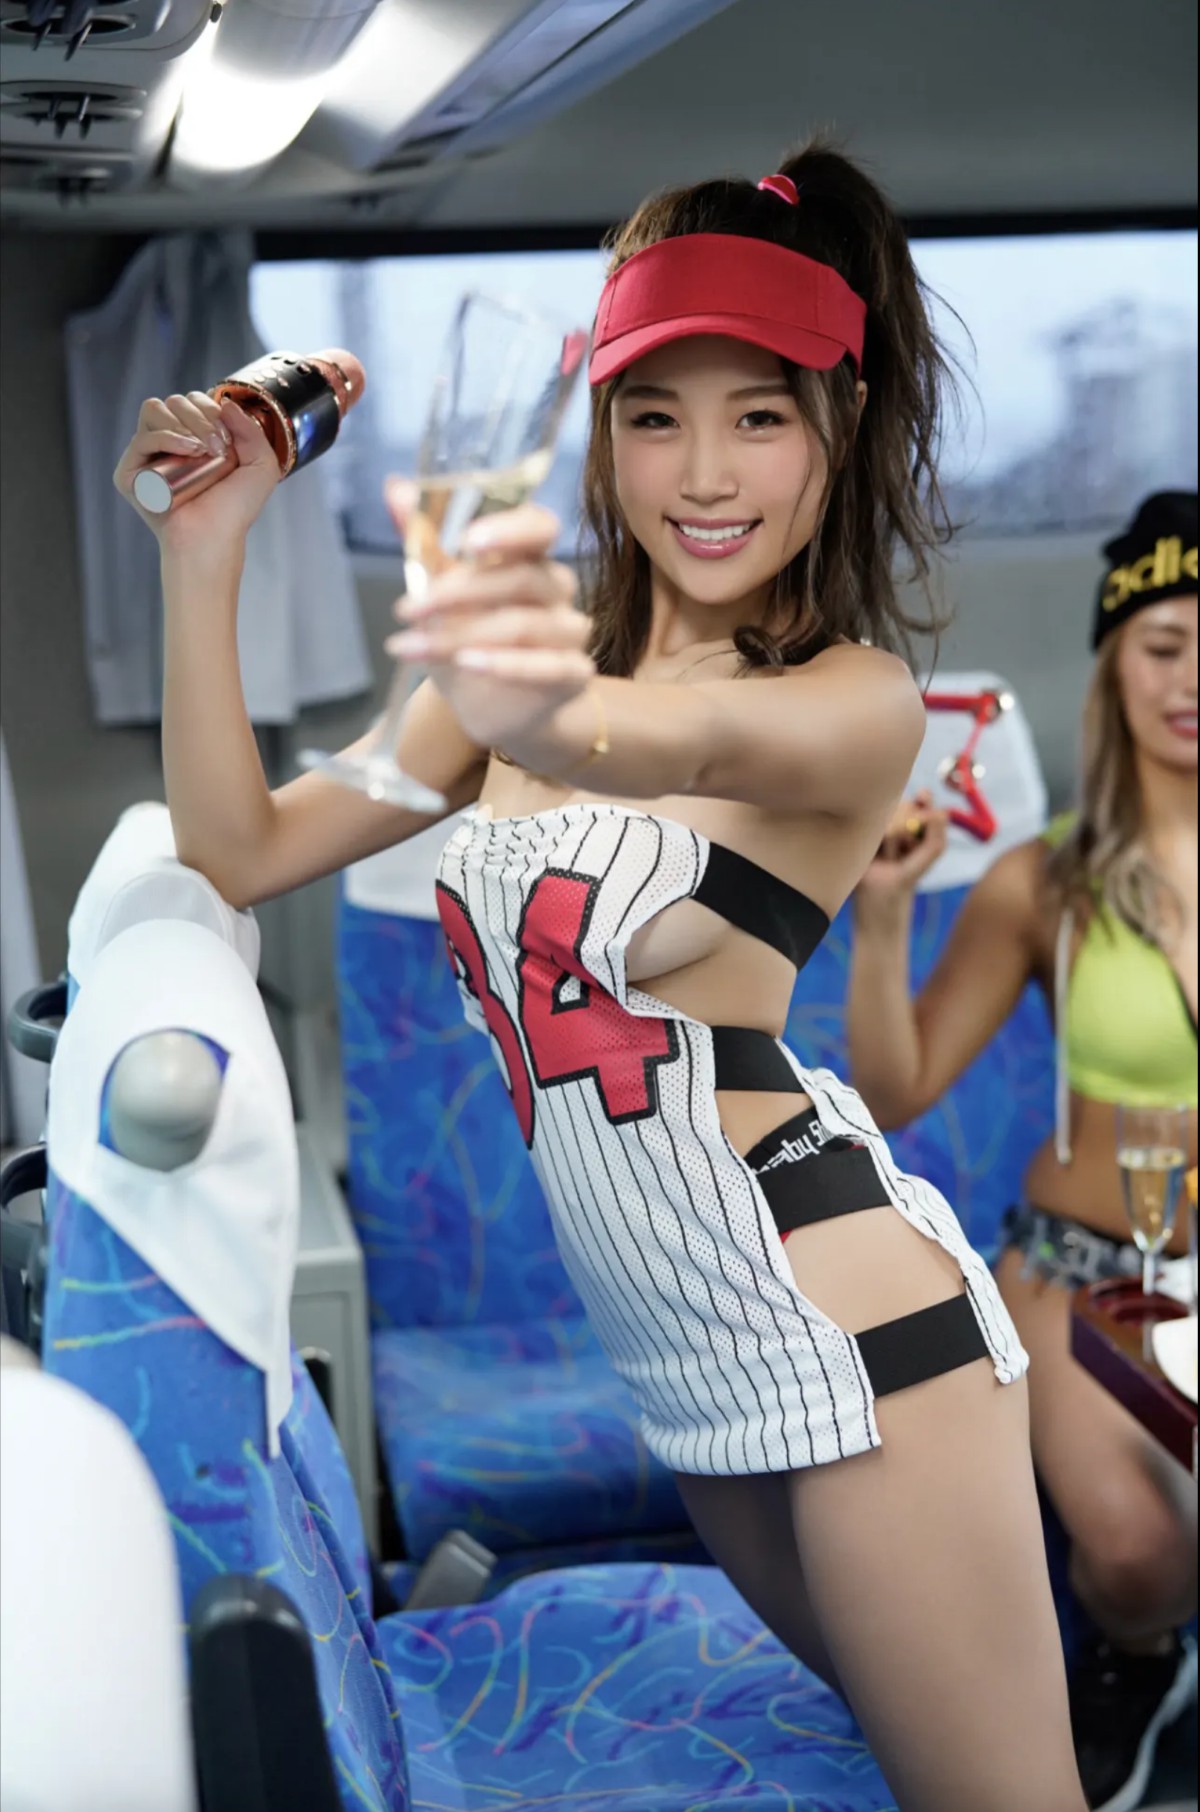 FRIDAYデジタル写真集 Cyber Japan Dancers Onsen Bus Tour Vol 1 With You 0006 0824117160.jpg